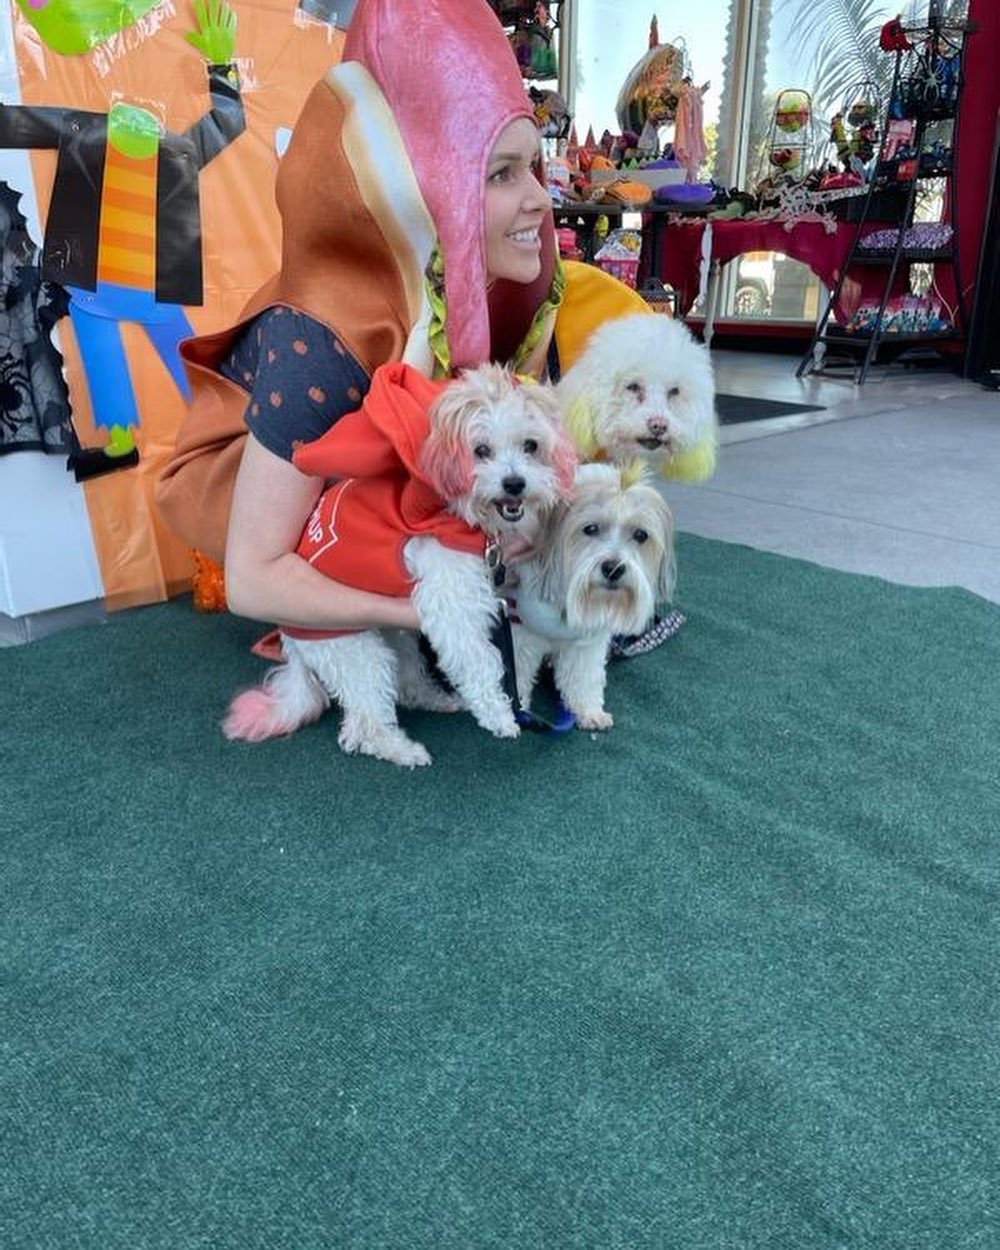 That 🌭 is none other than BRB Foster Fail @vieveland with her beautiful pack of senior girls… Samantha, Kiwi and April (ketchup, popcorn and mustard ). They were at @topdogbarkery HOWL’oween pawty 🎃🕸👻 @vieveland and Kiwi adopted bonded senior girls April and Samantha when their previous owner was no longer to keep them.  <a target='_blank' href='https://www.instagram.com/explore/tags/fosterfail/'>#fosterfail</a><a target='_blank' href='https://www.instagram.com/explore/tags/fosteringsaveslives/'>#fosteringsaveslives</a><a target='_blank' href='https://www.instagram.com/explore/tags/makeadifference/'>#makeadifference</a><a target='_blank' href='https://www.instagram.com/explore/tags/seniordogsofinstagram/'>#seniordogsofinstagram</a><a target='_blank' href='https://www.instagram.com/explore/tags/dailyfluff/'>#dailyfluff</a> <a target='_blank' href='https://www.instagram.com/explore/tags/halloween/'>#halloween</a><a target='_blank' href='https://www.instagram.com/explore/tags/adopt/'>#adopt</a><a target='_blank' href='https://www.instagram.com/explore/tags/rescuedogs/'>#rescuedogs</a>